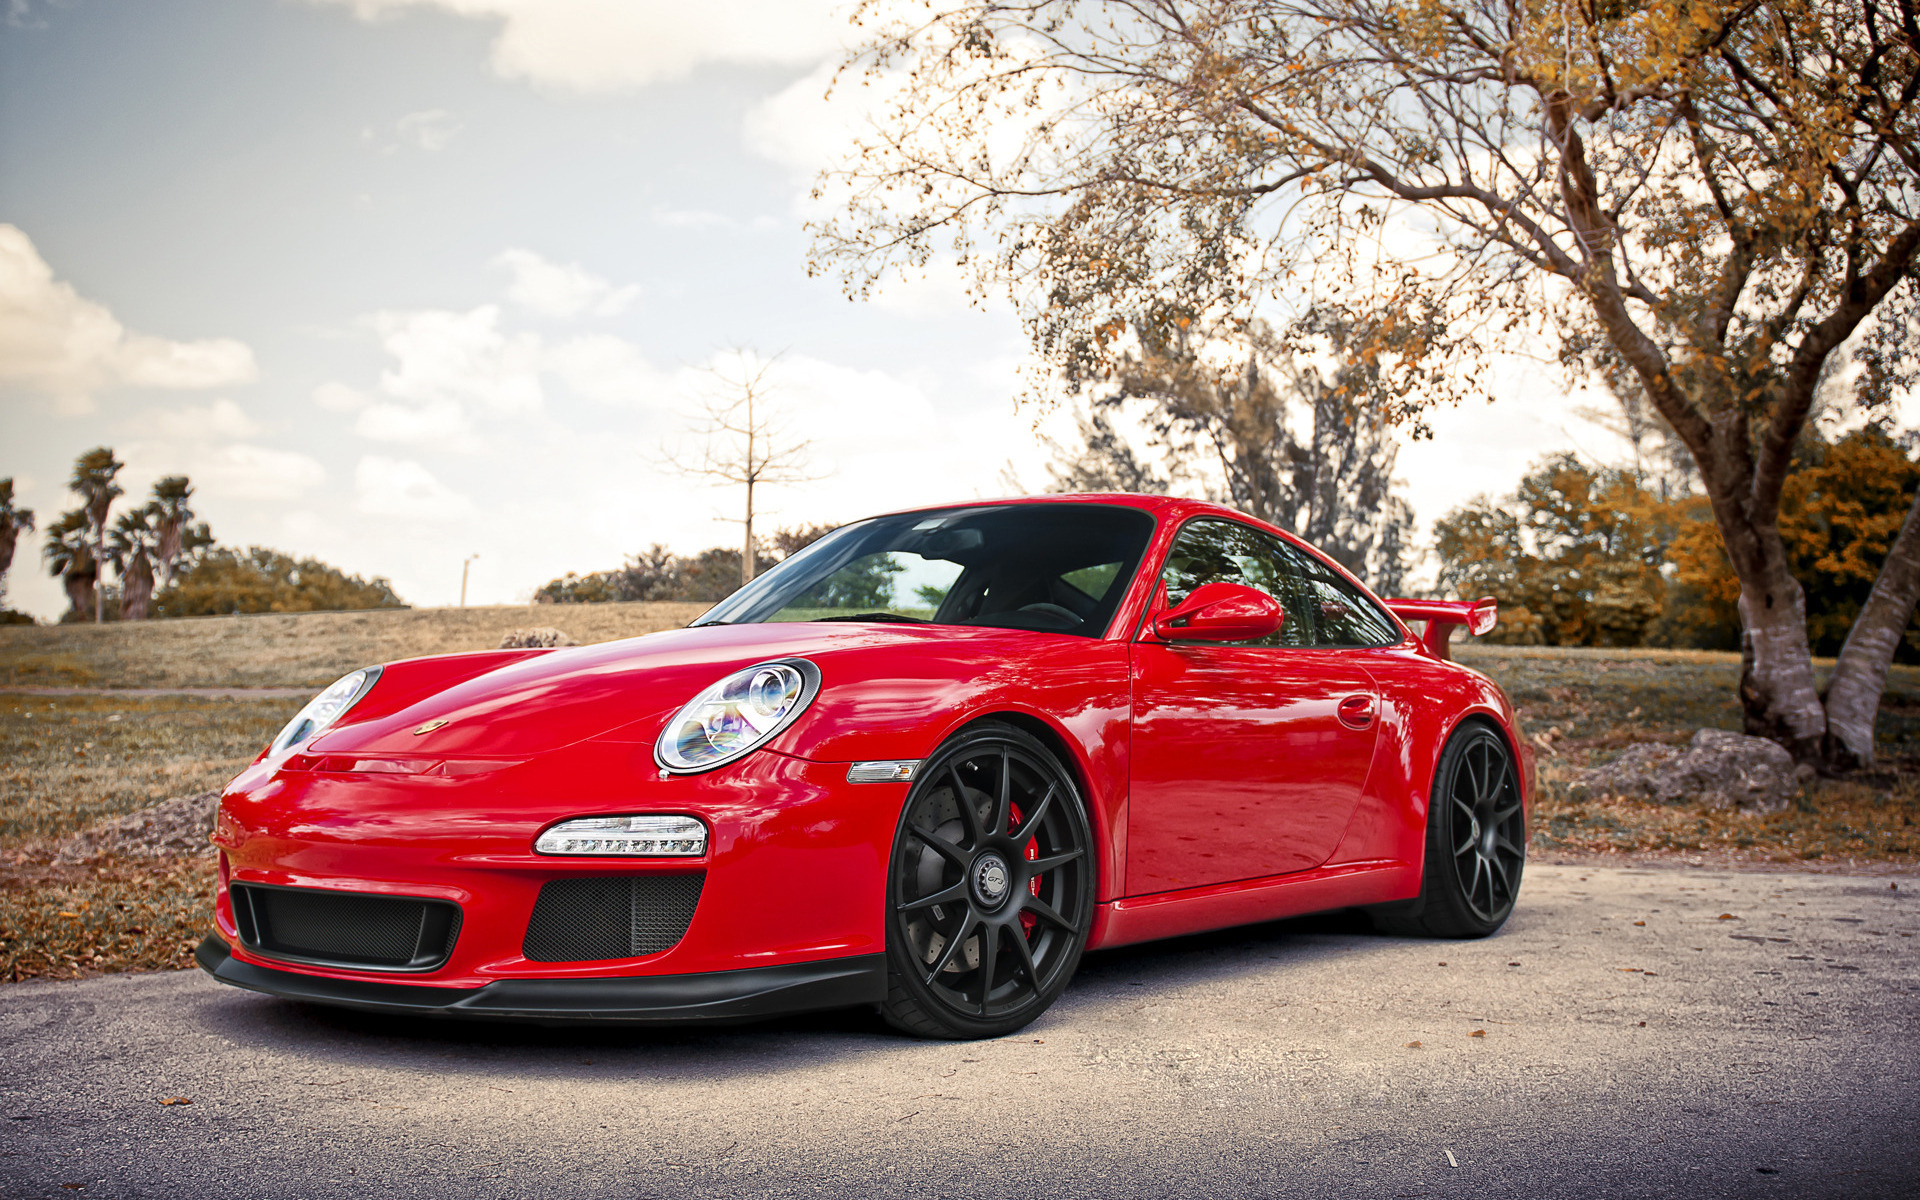 Porsche 997 GT3 wallpapers and images - wallpapers, pictures, photos